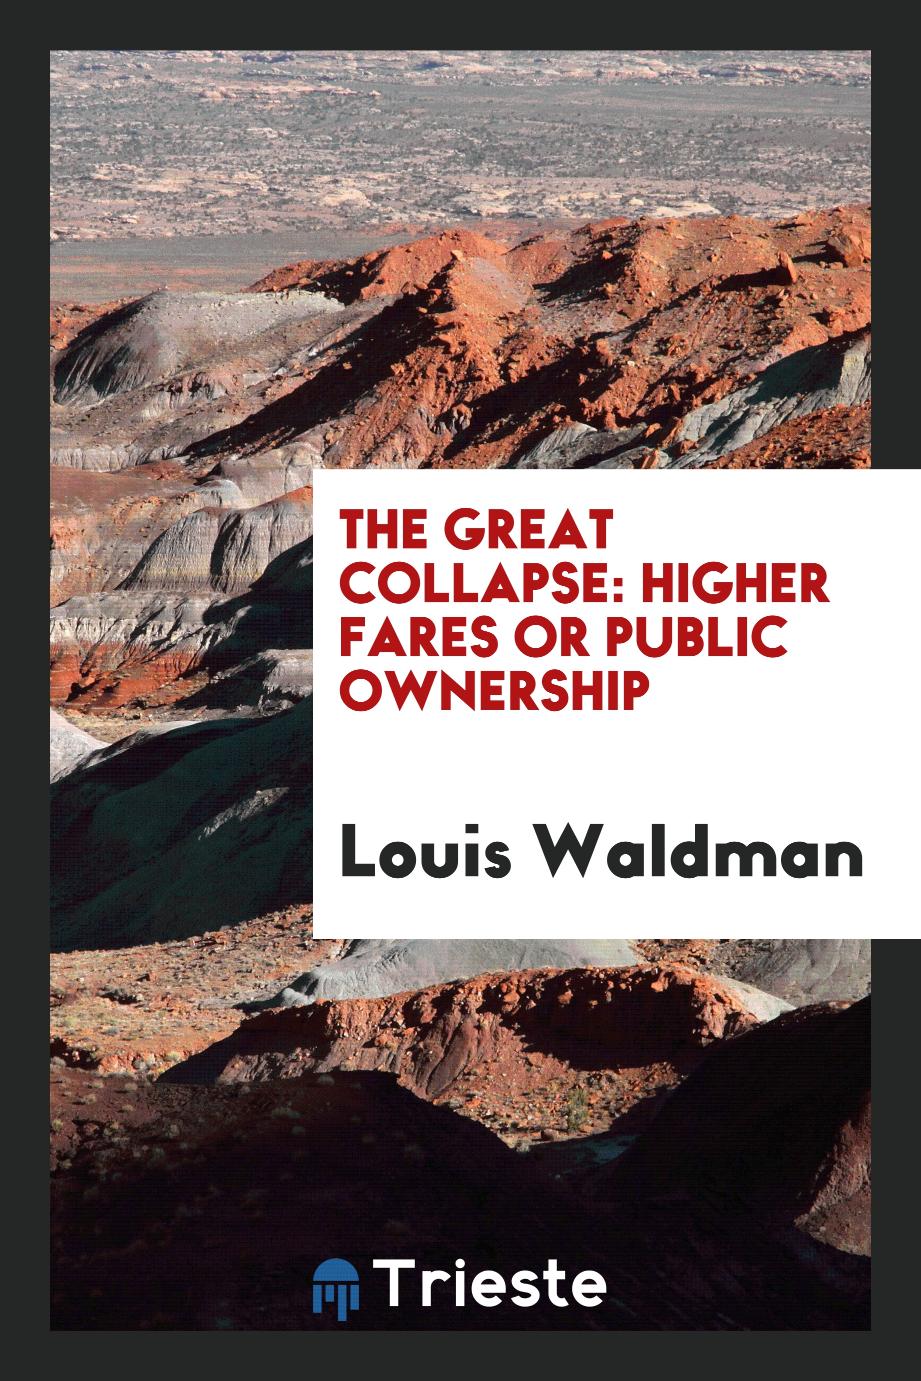 The Great Collapse: Higher Fares Or Public Ownership